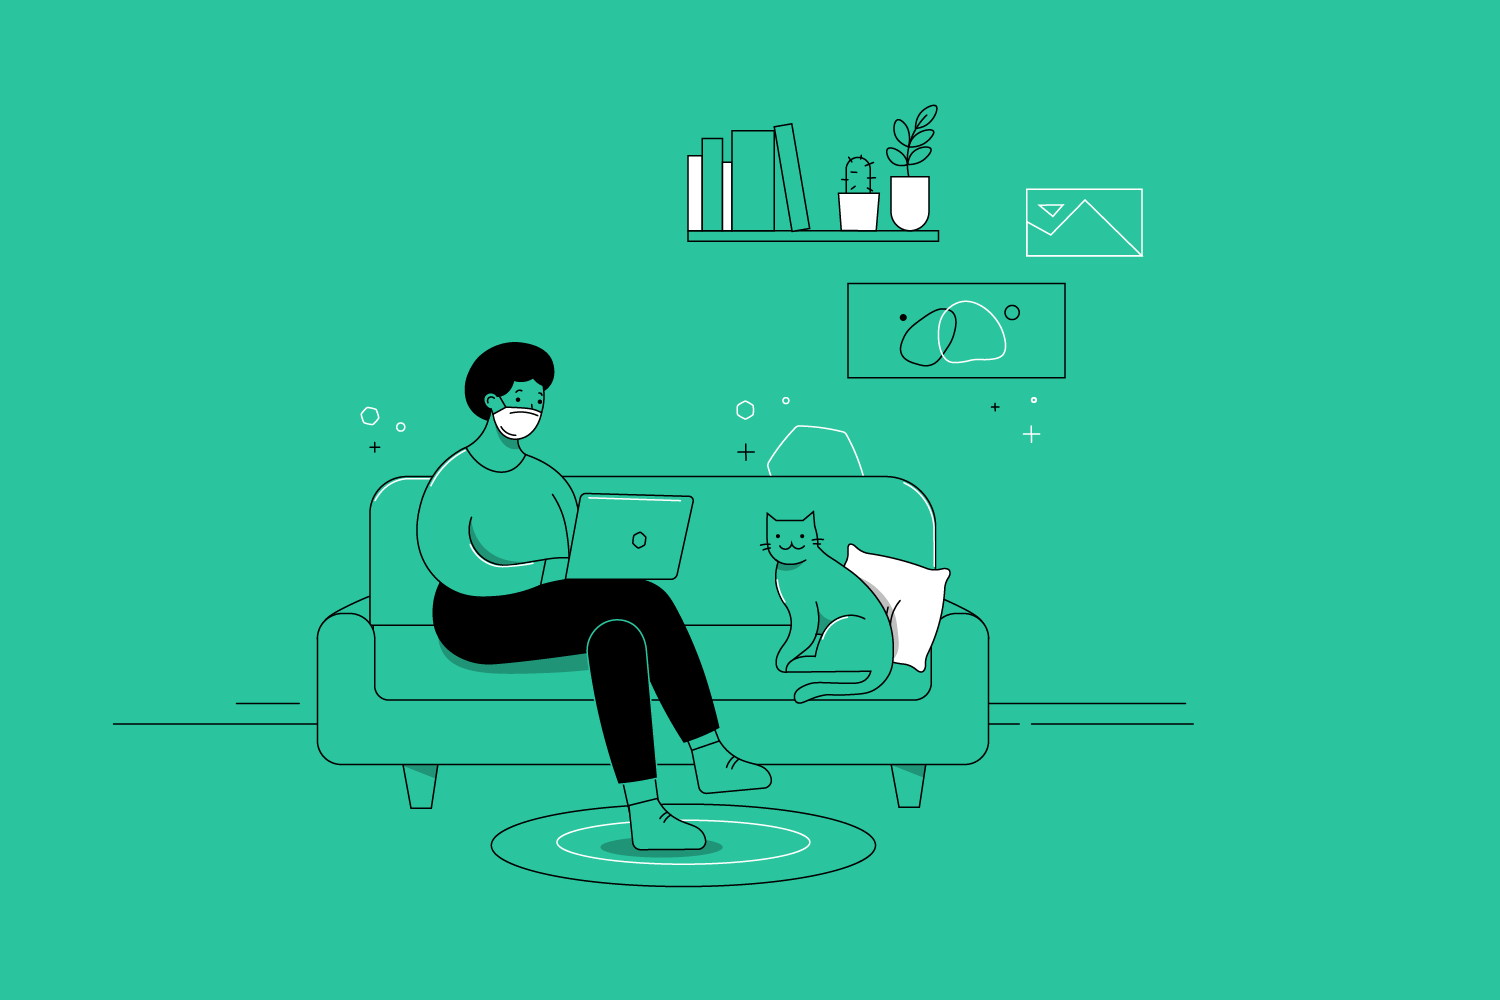 Illustration of a person wearing a mask, sitting on their sofa with a laptop along with a cat